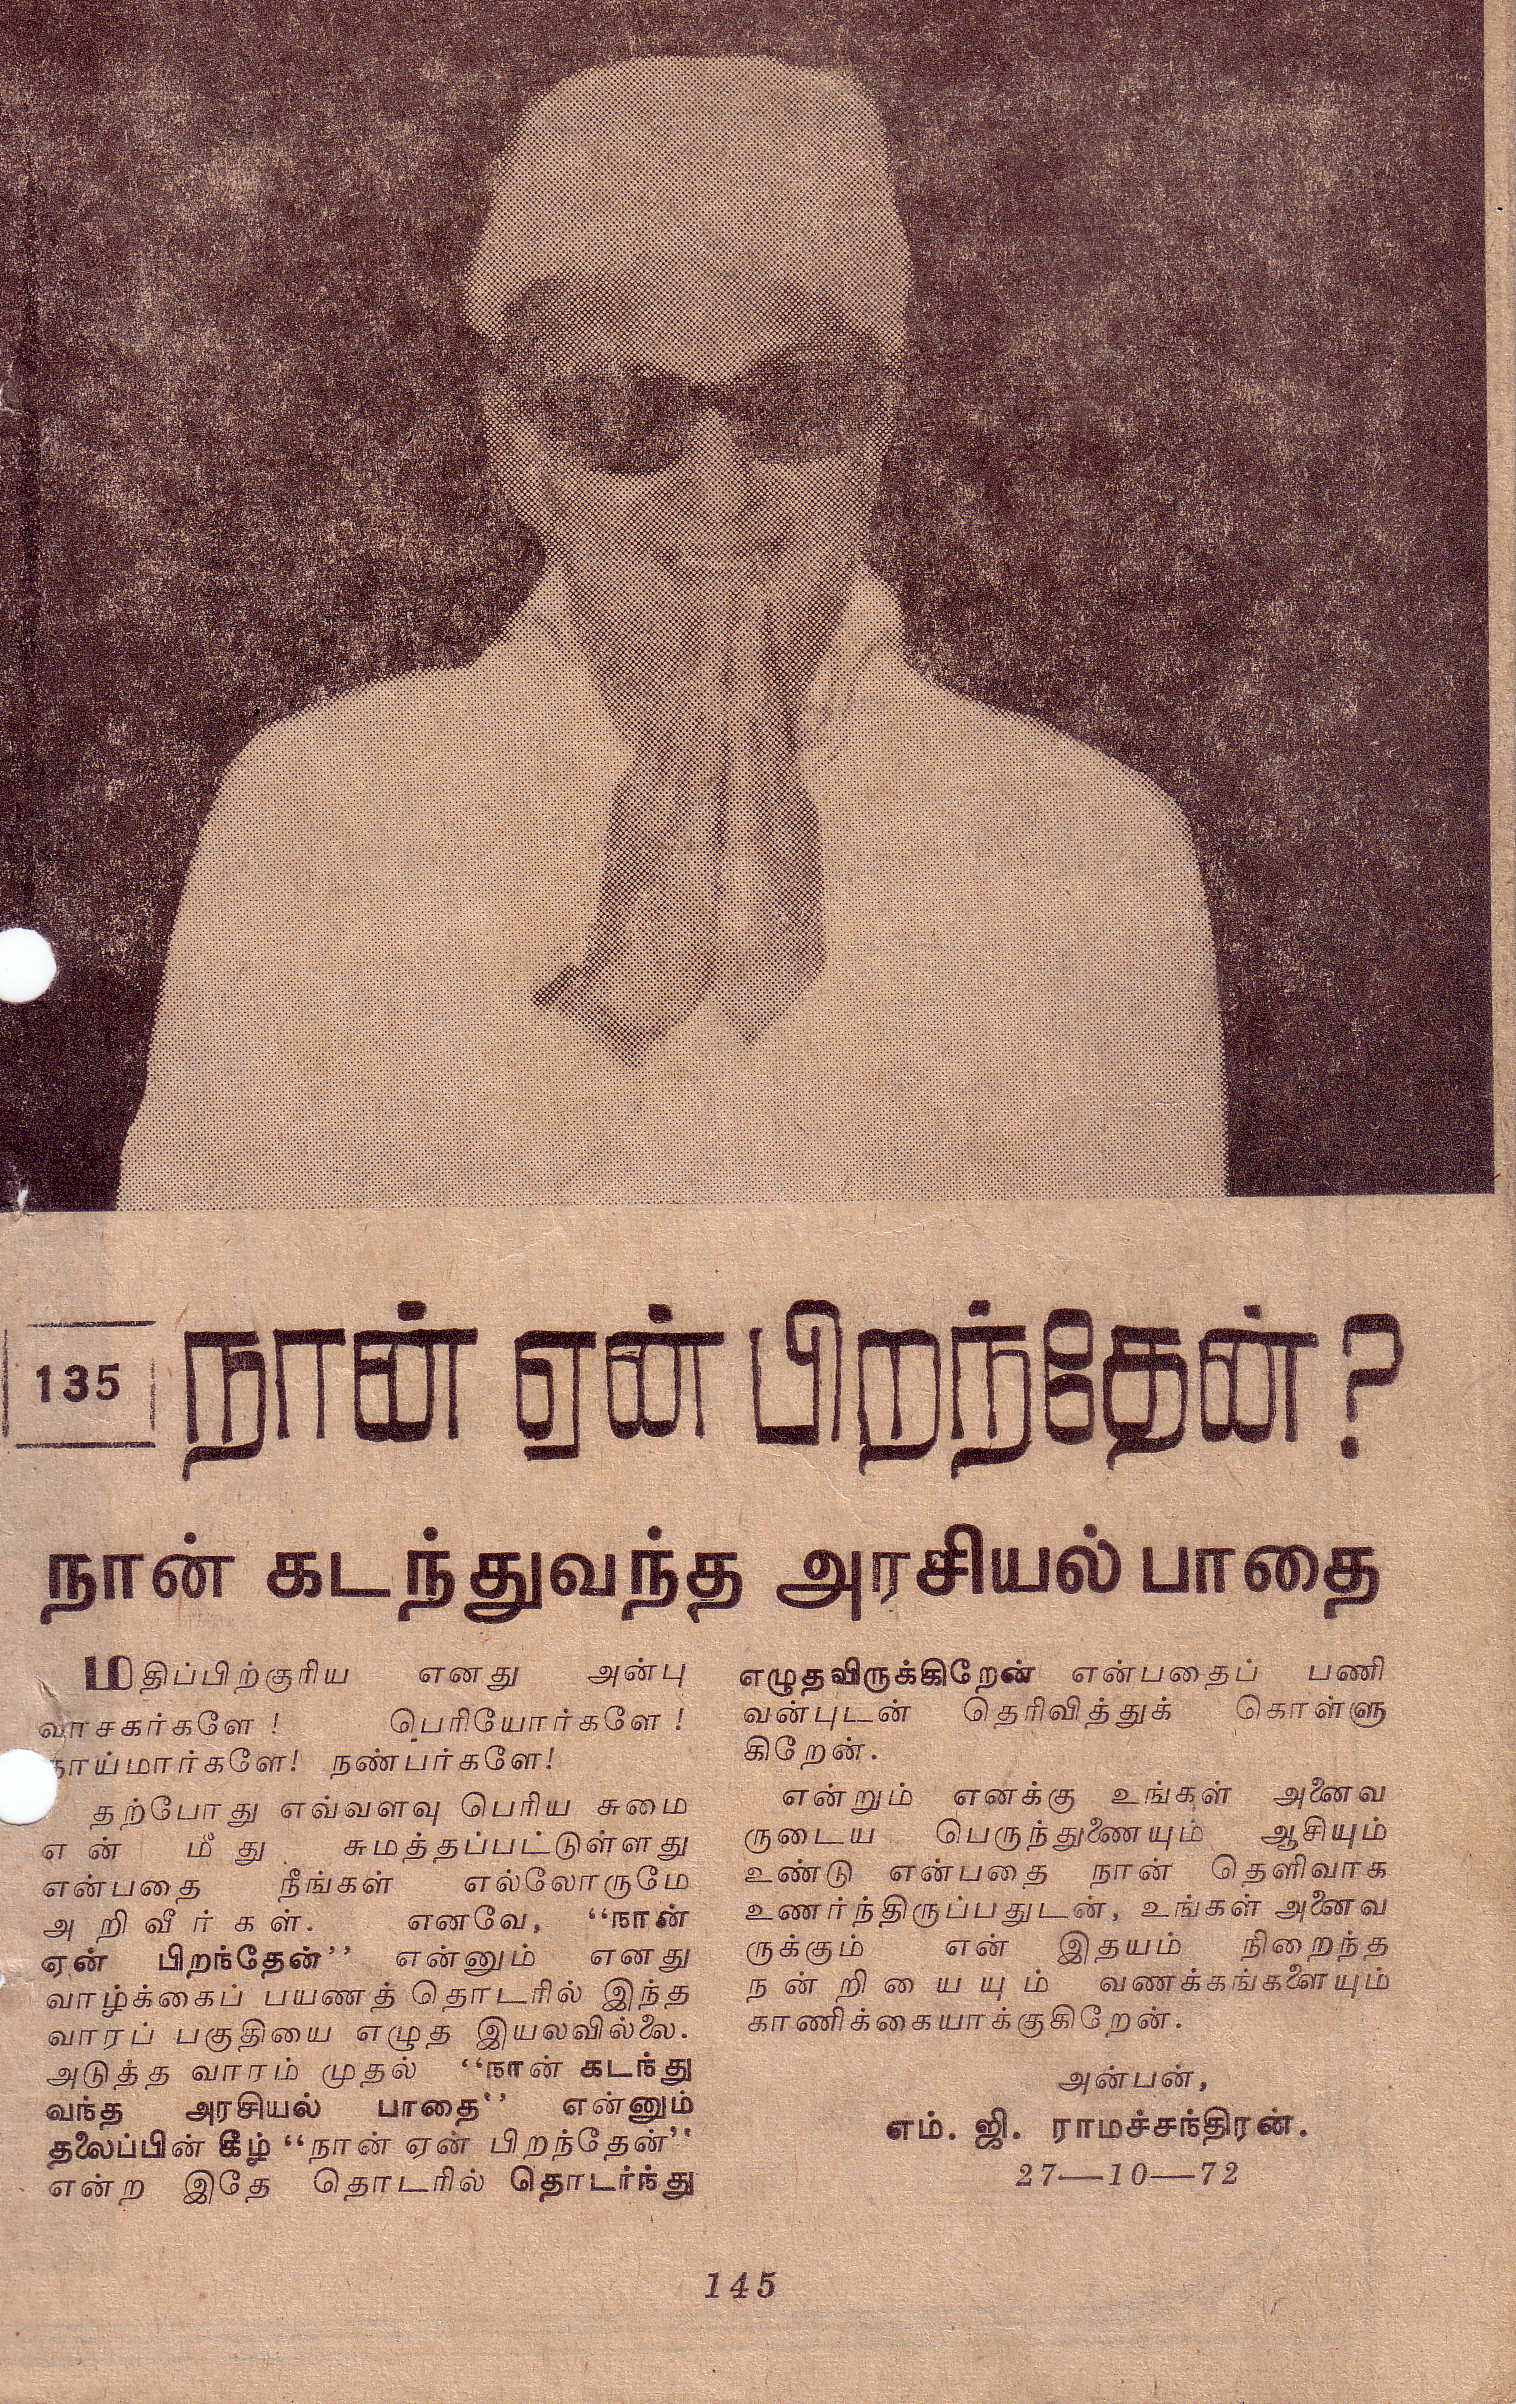 MGR autobiography Final Note #135 dated Oct 27 1972